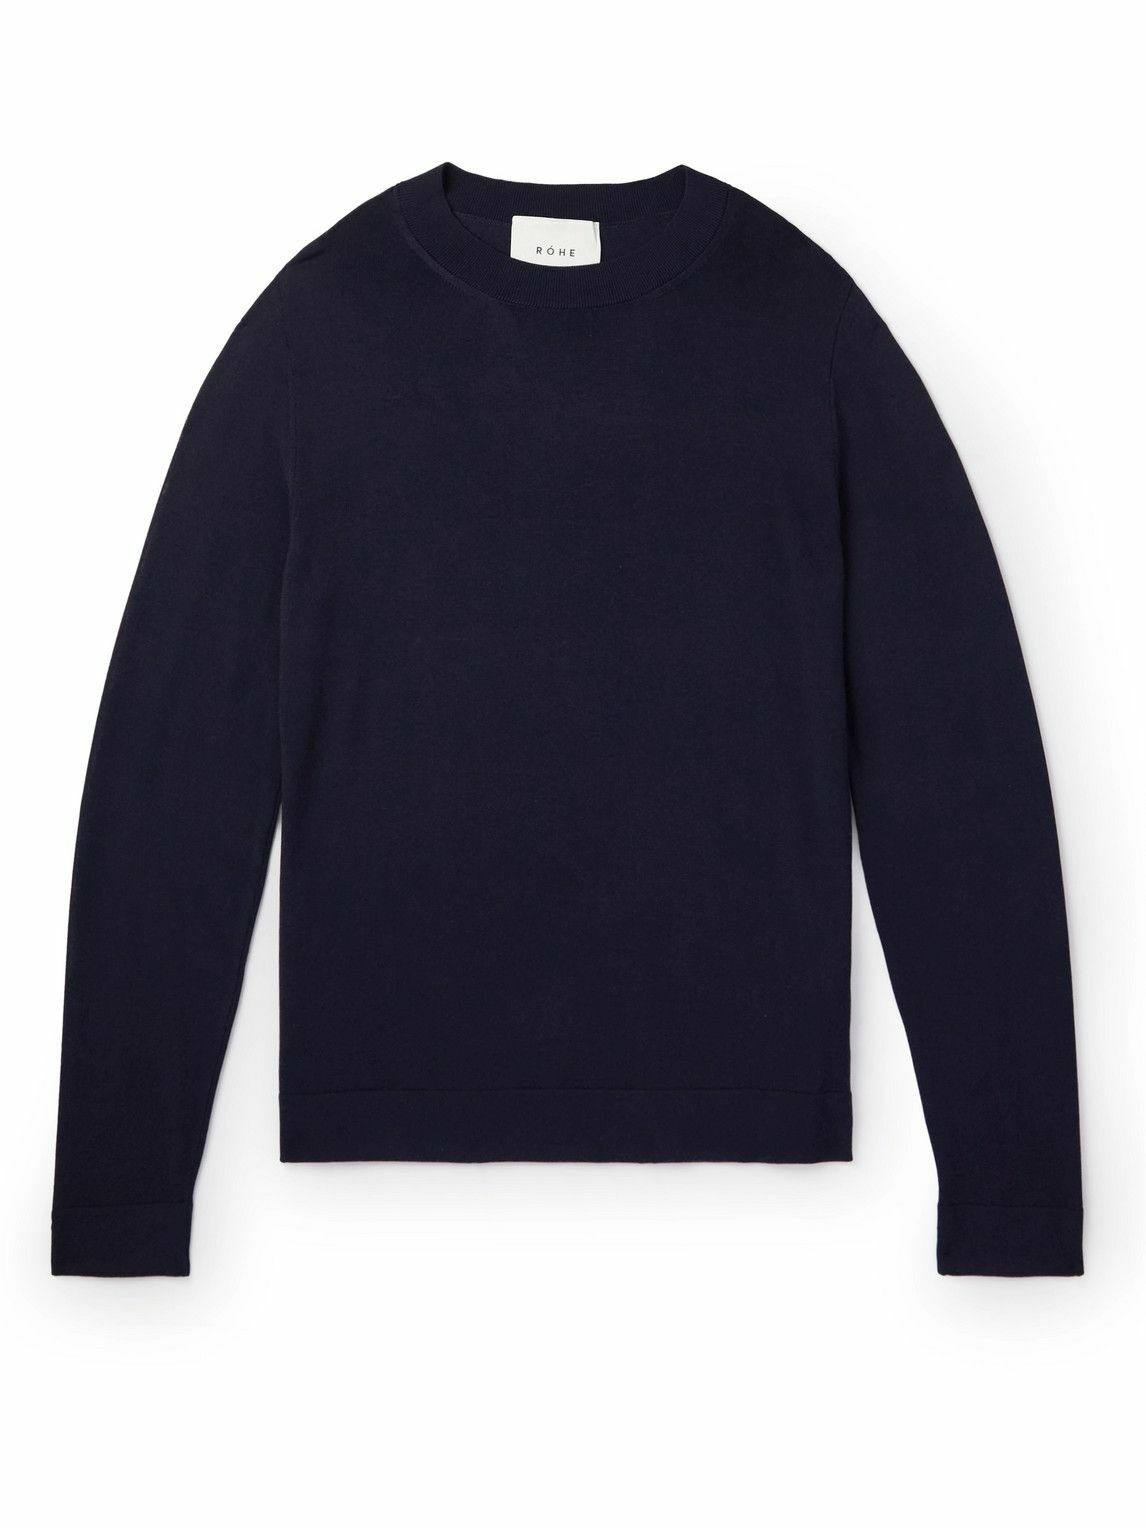 RÓHE - Knitted Sweater - Blue